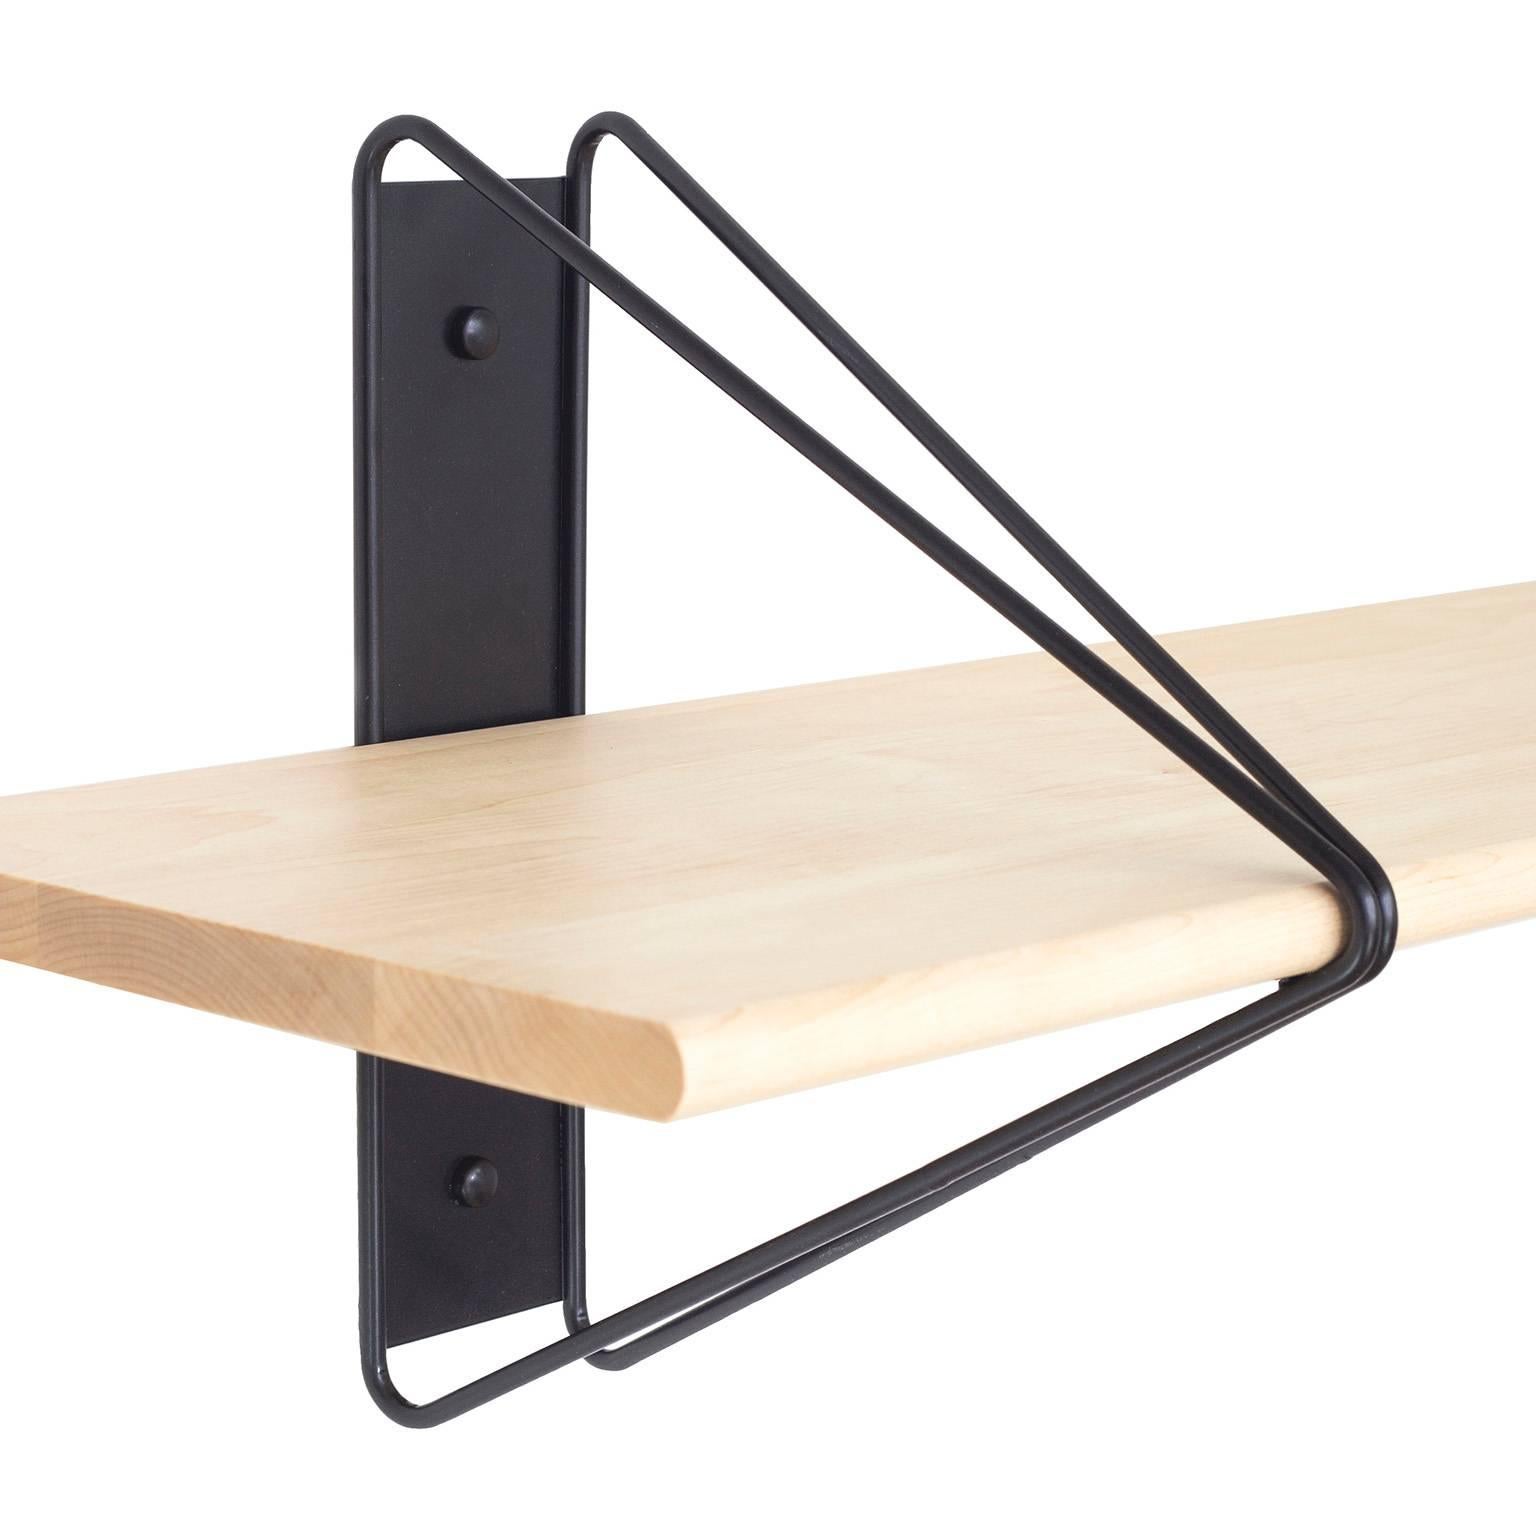 Modern Set of 4 Strut Shelves from Souda, Black and Maple, Made to Order For Sale